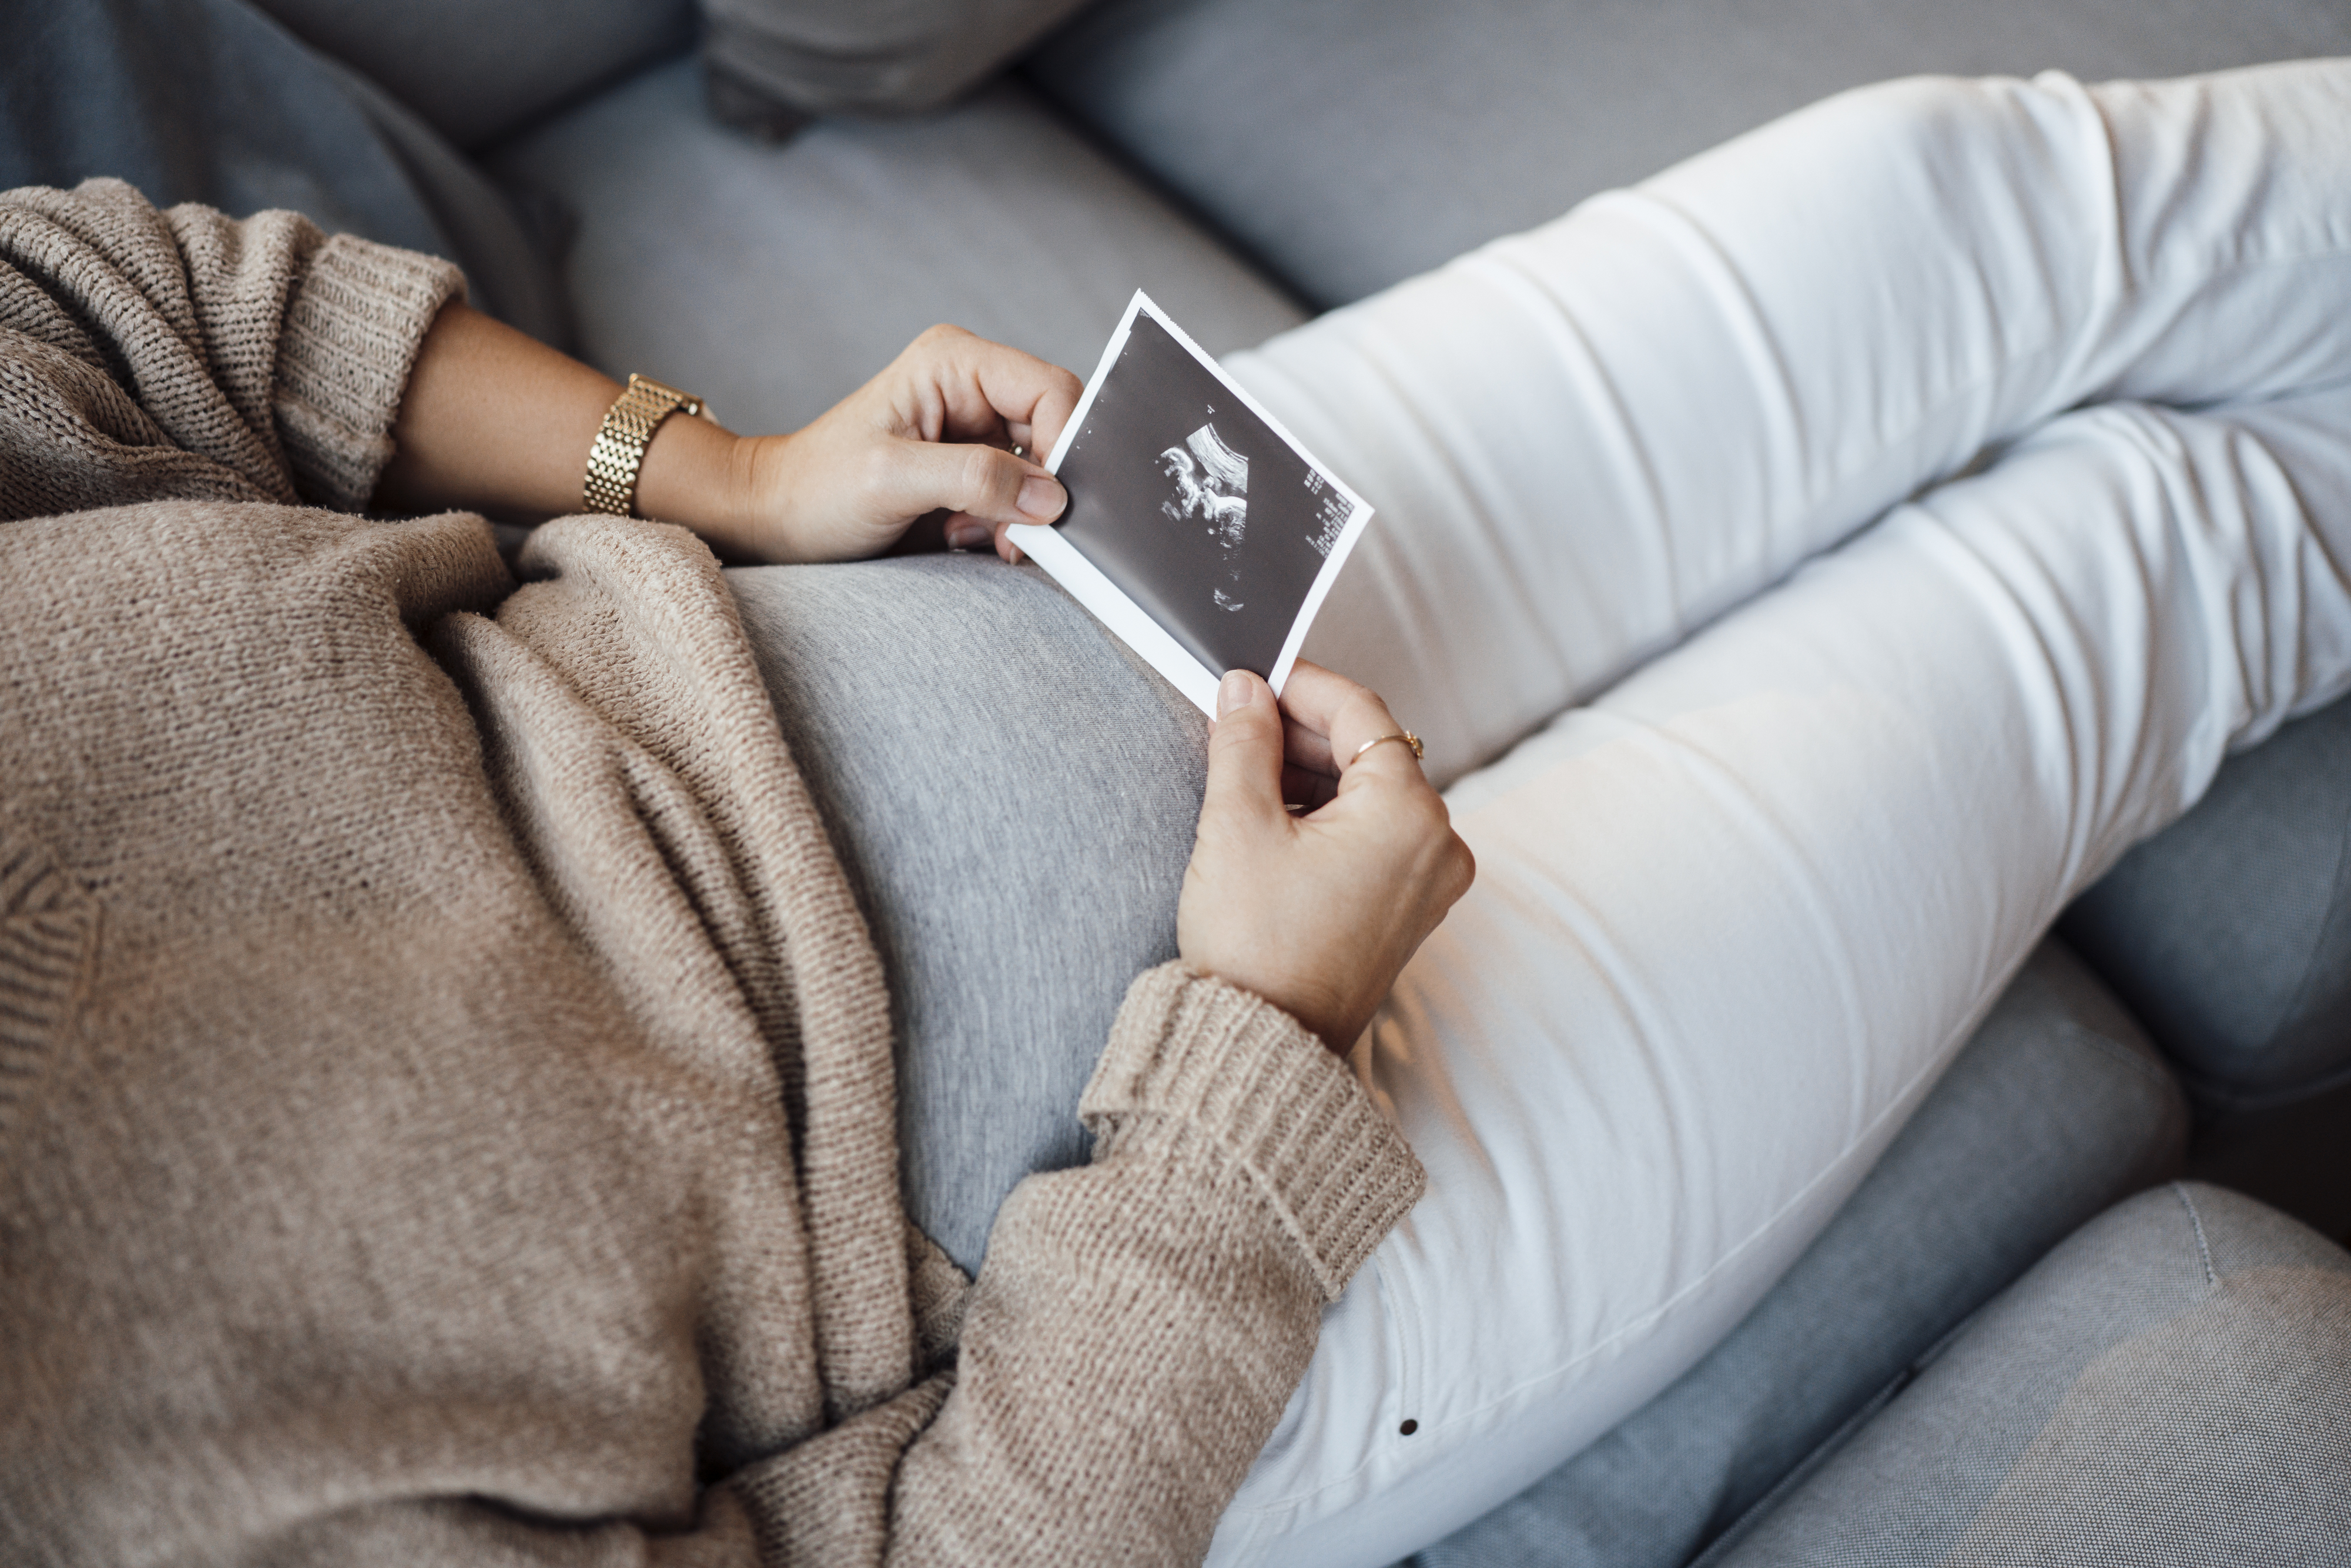 Pregnant person sitting, holding ultrasound photo over belly